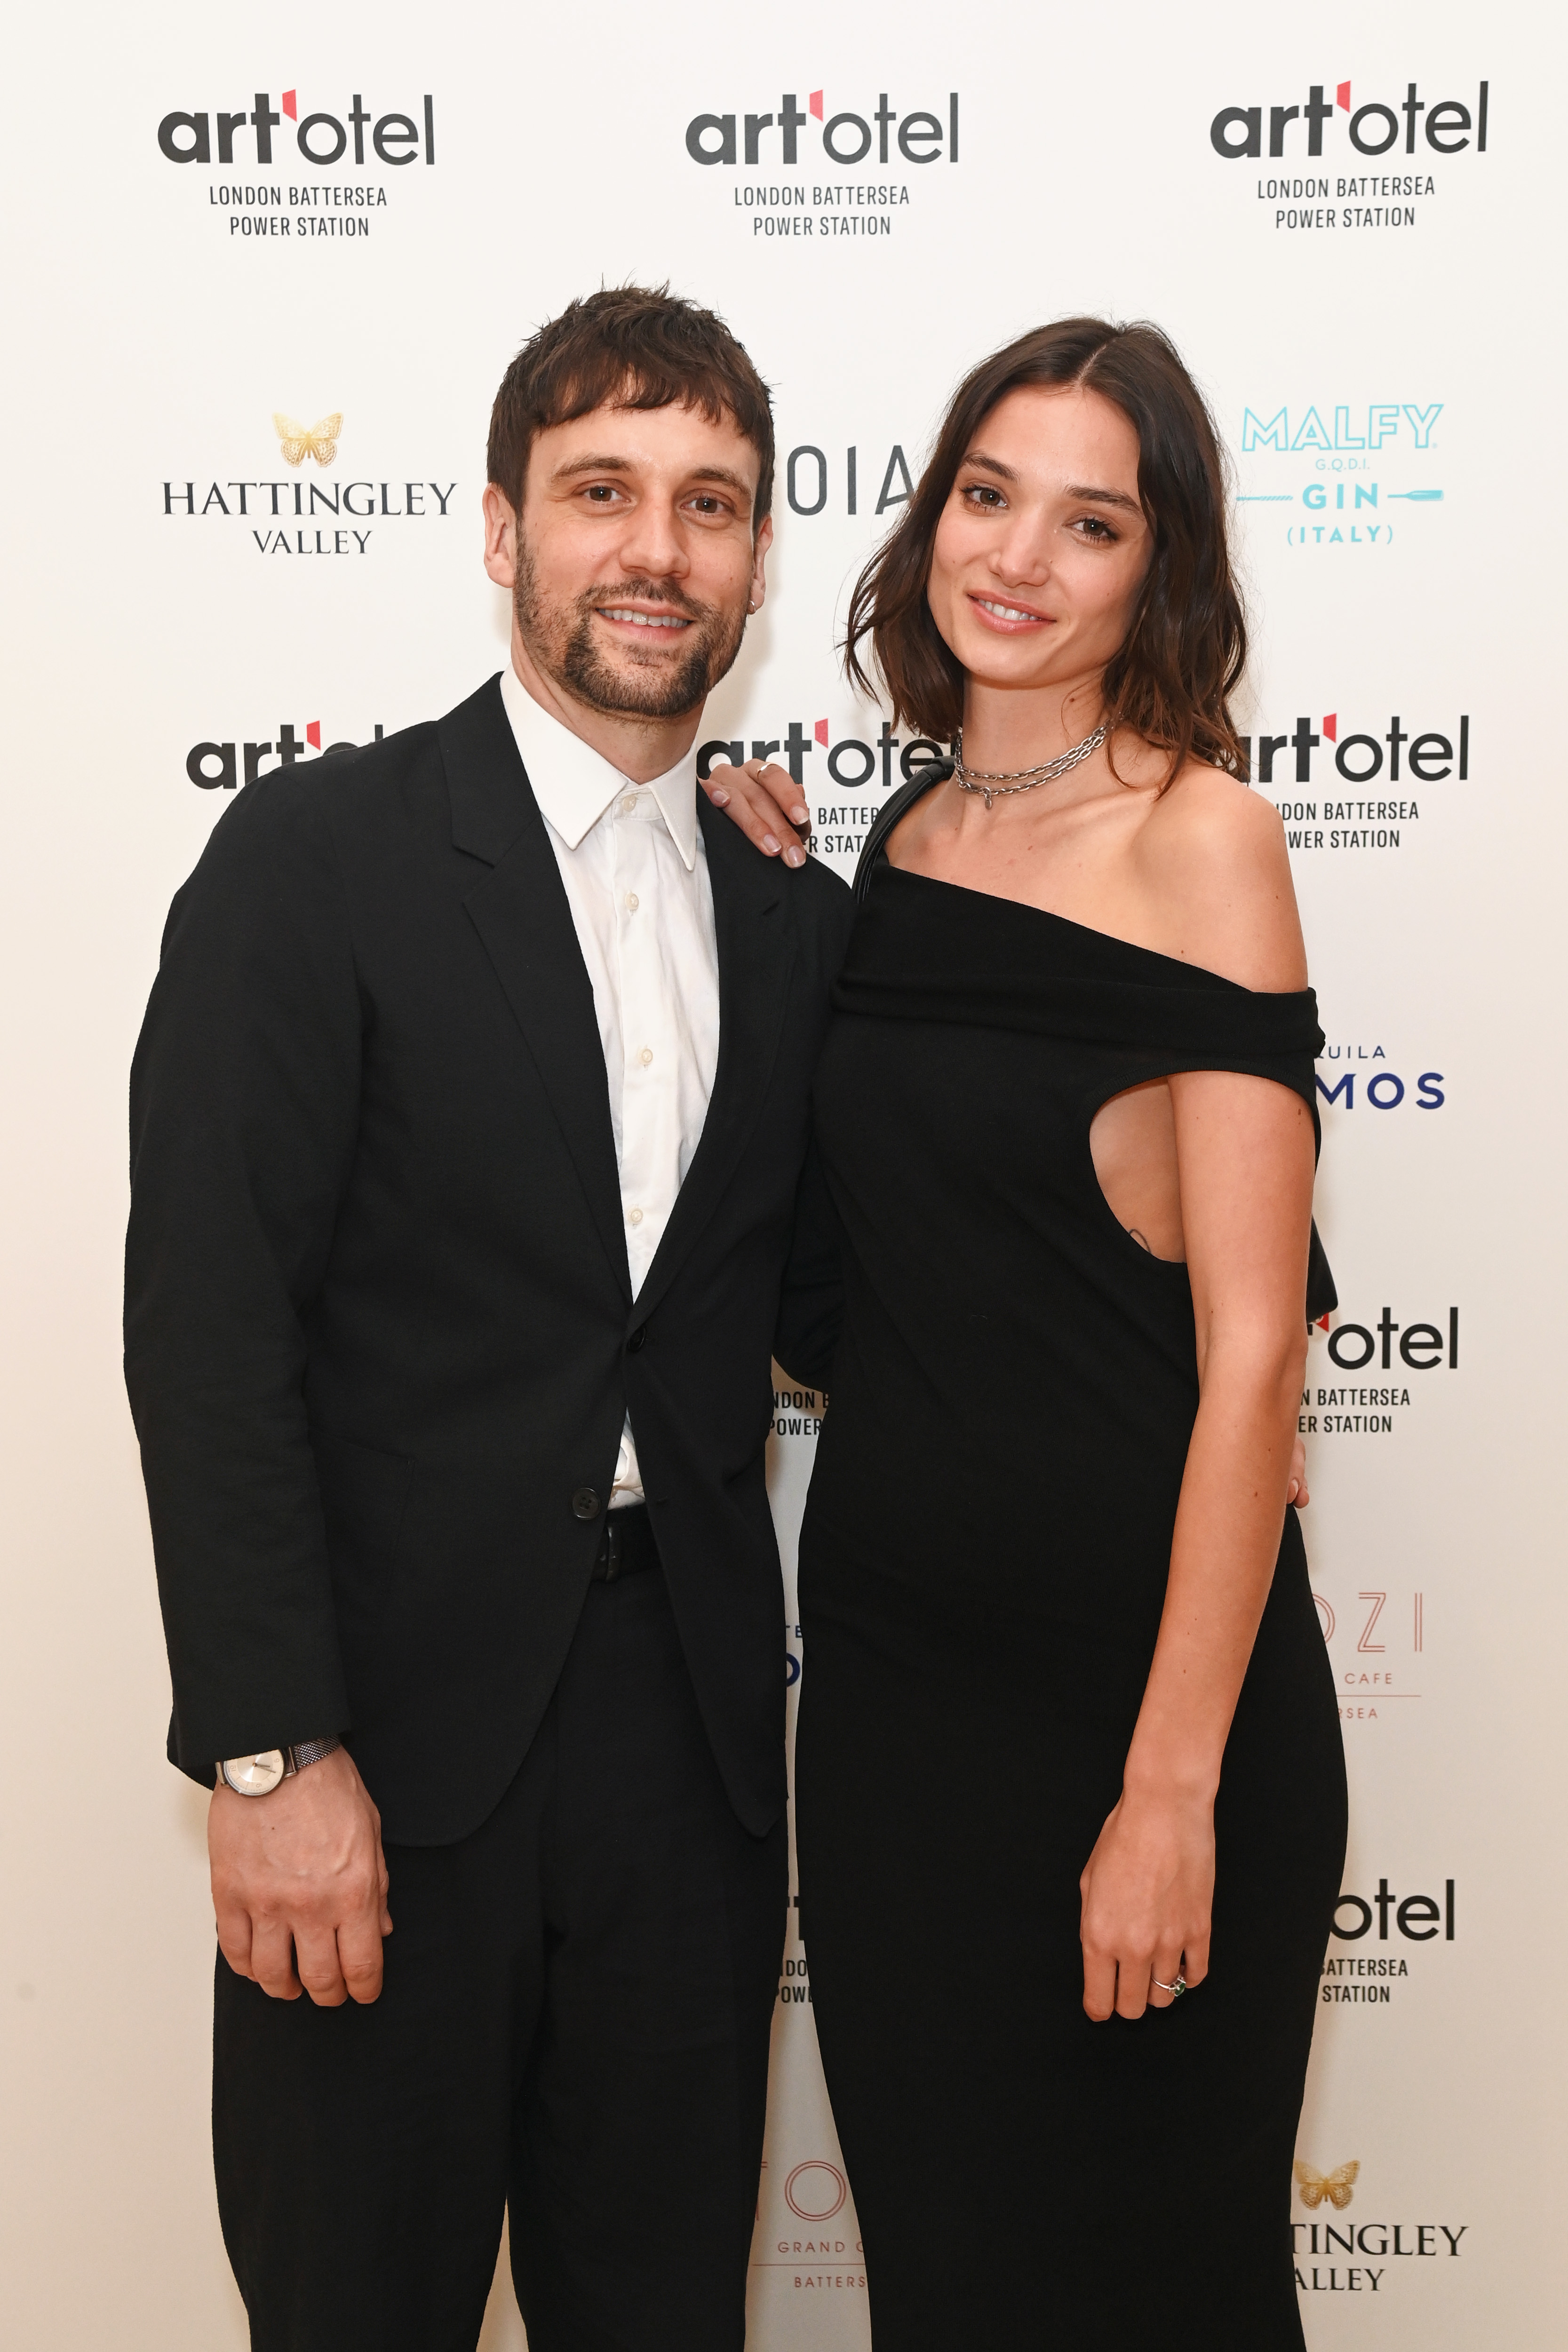 Nick Blood and Emory Ault arrive at the art'otel London Battersea Power Station launch event on April 26, 2023, in London, England. | Source: Getty Images